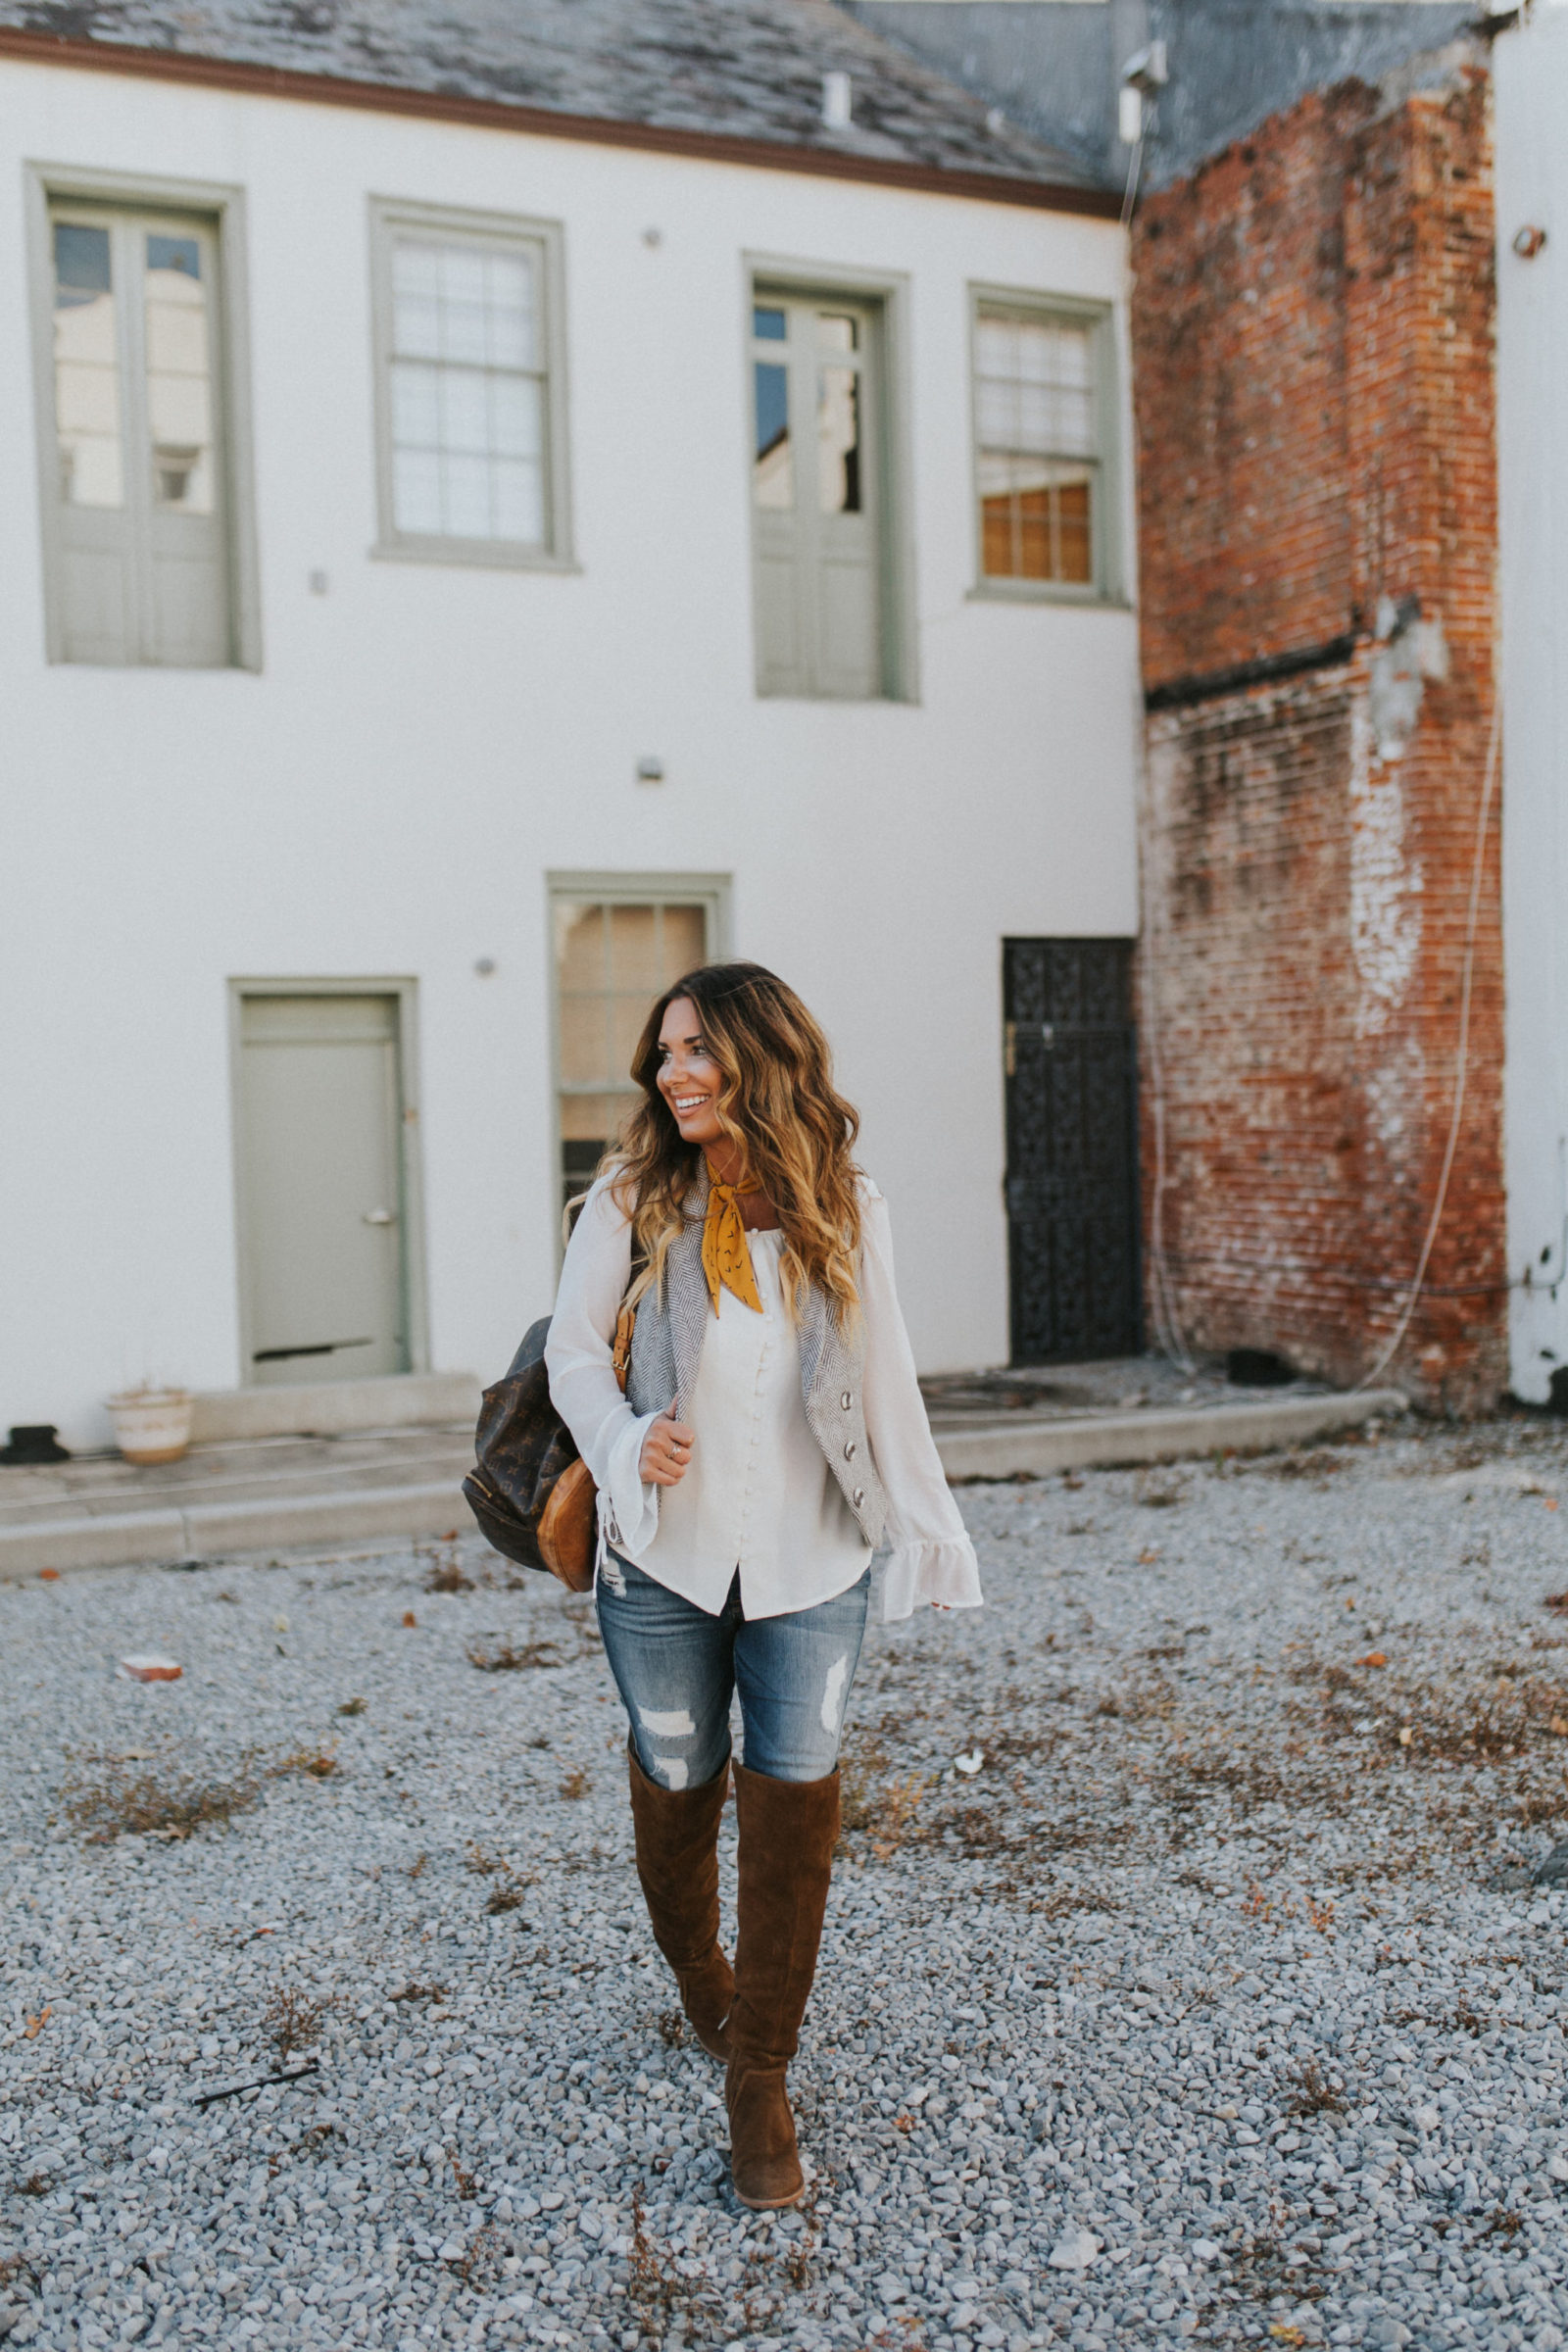 BUTTON UP TOP IN EGGSHELL STYLED TWO WAYS. READ MORE TO SEE HOW TO CREATE TWO CASUAL OUTFTS WITH ONE TOP.